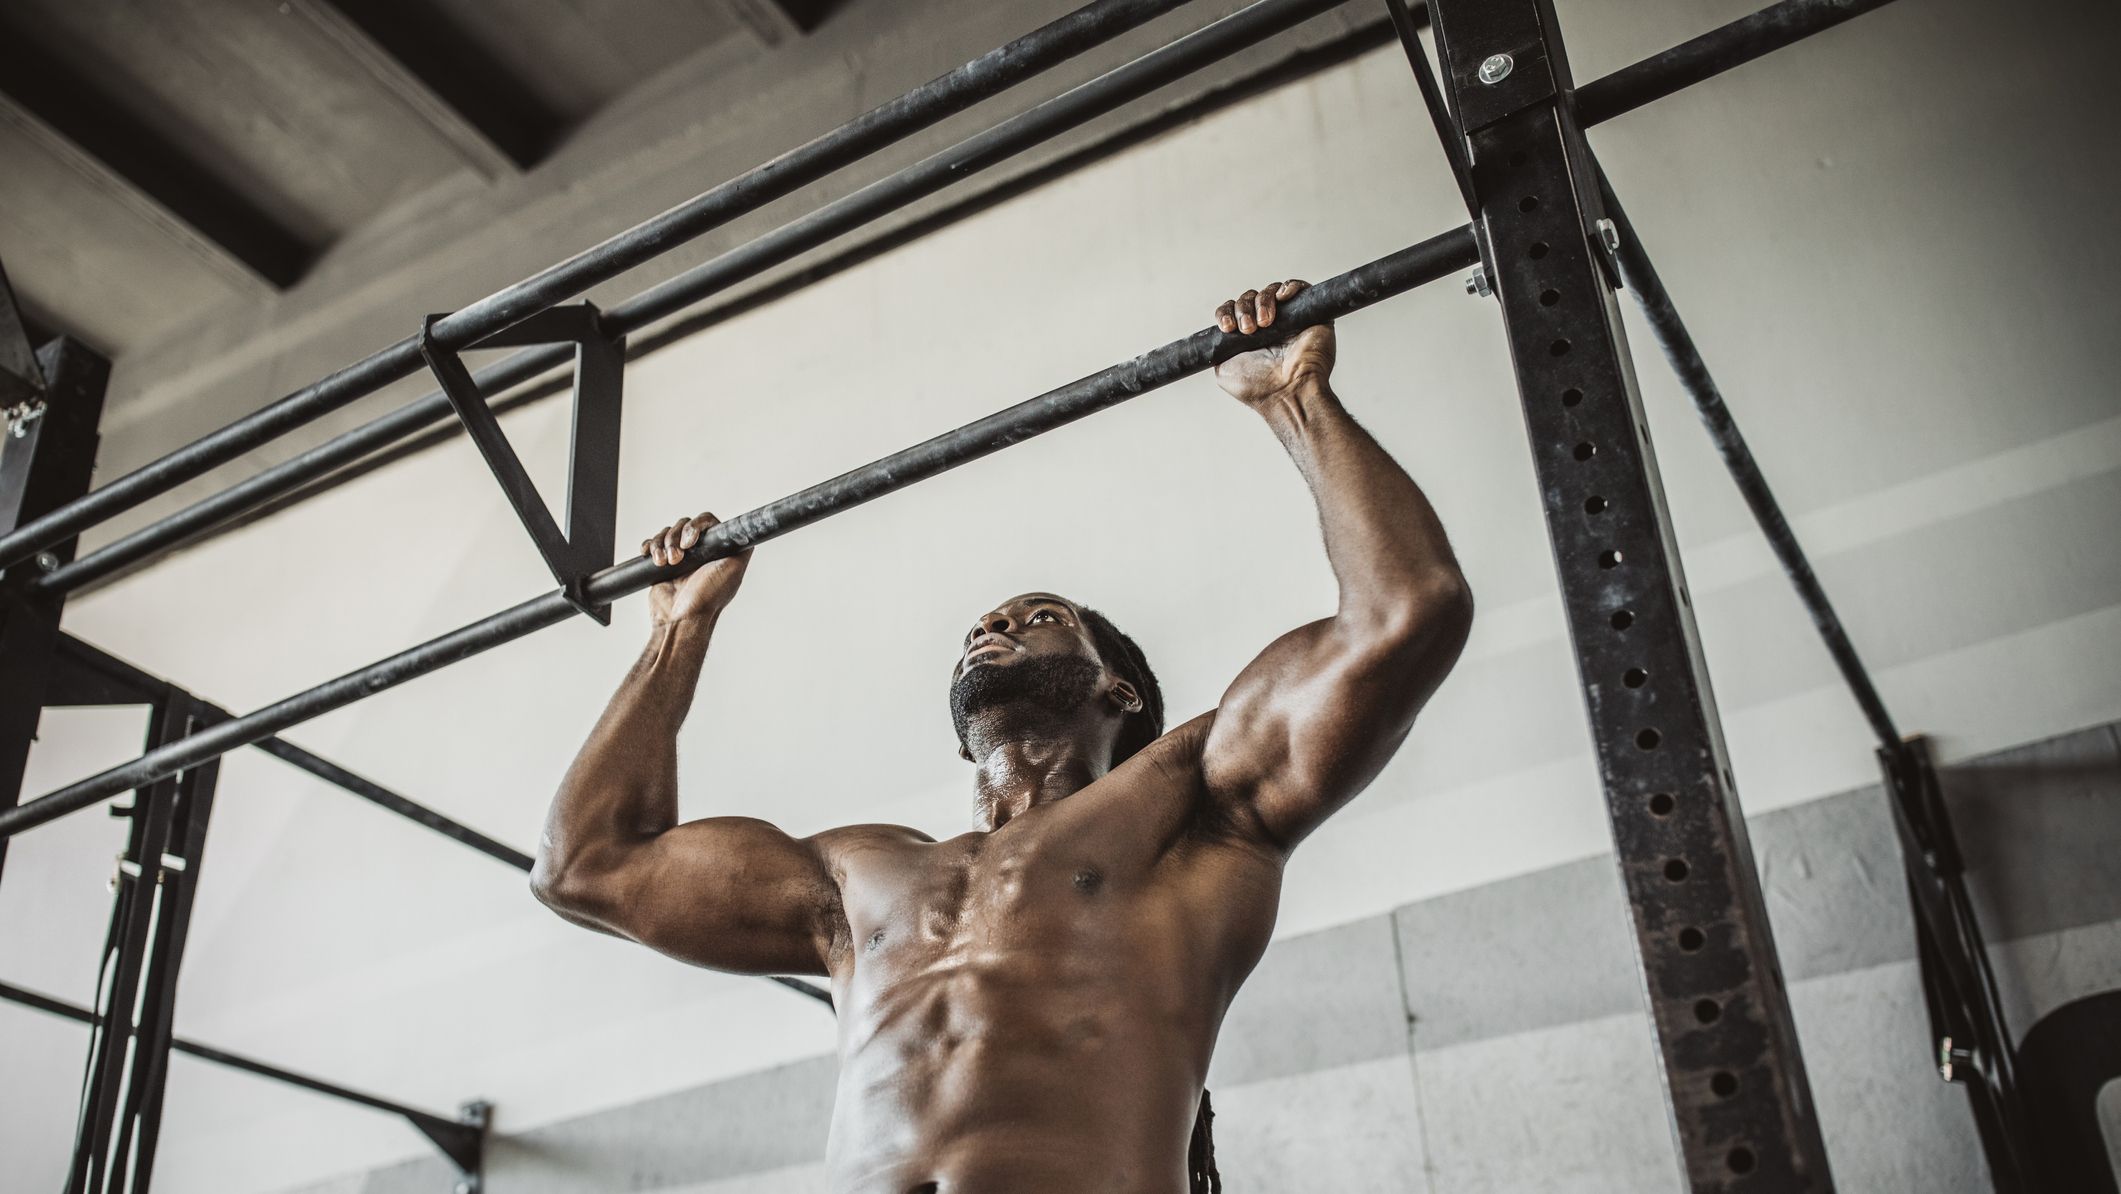 Chin-Ups Are a Challenge—Here's How to Do Them